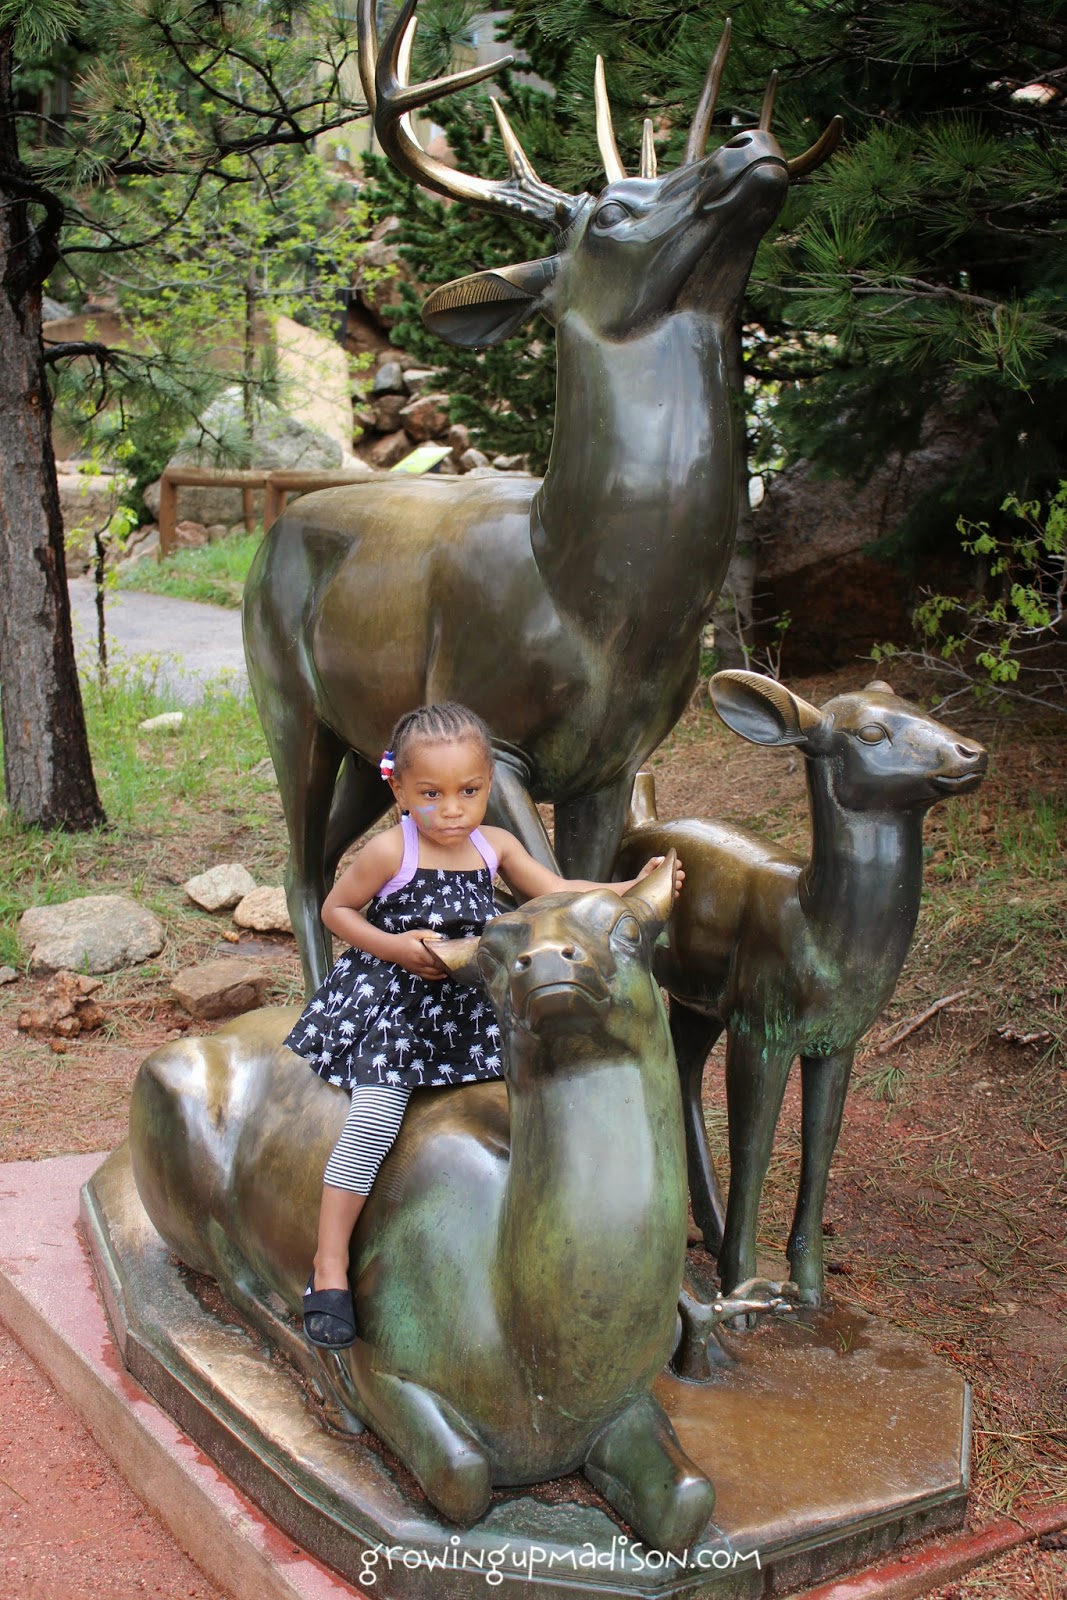 A Day at the Cheyenne Mountain Zoo – Almost Wordless Wednesday